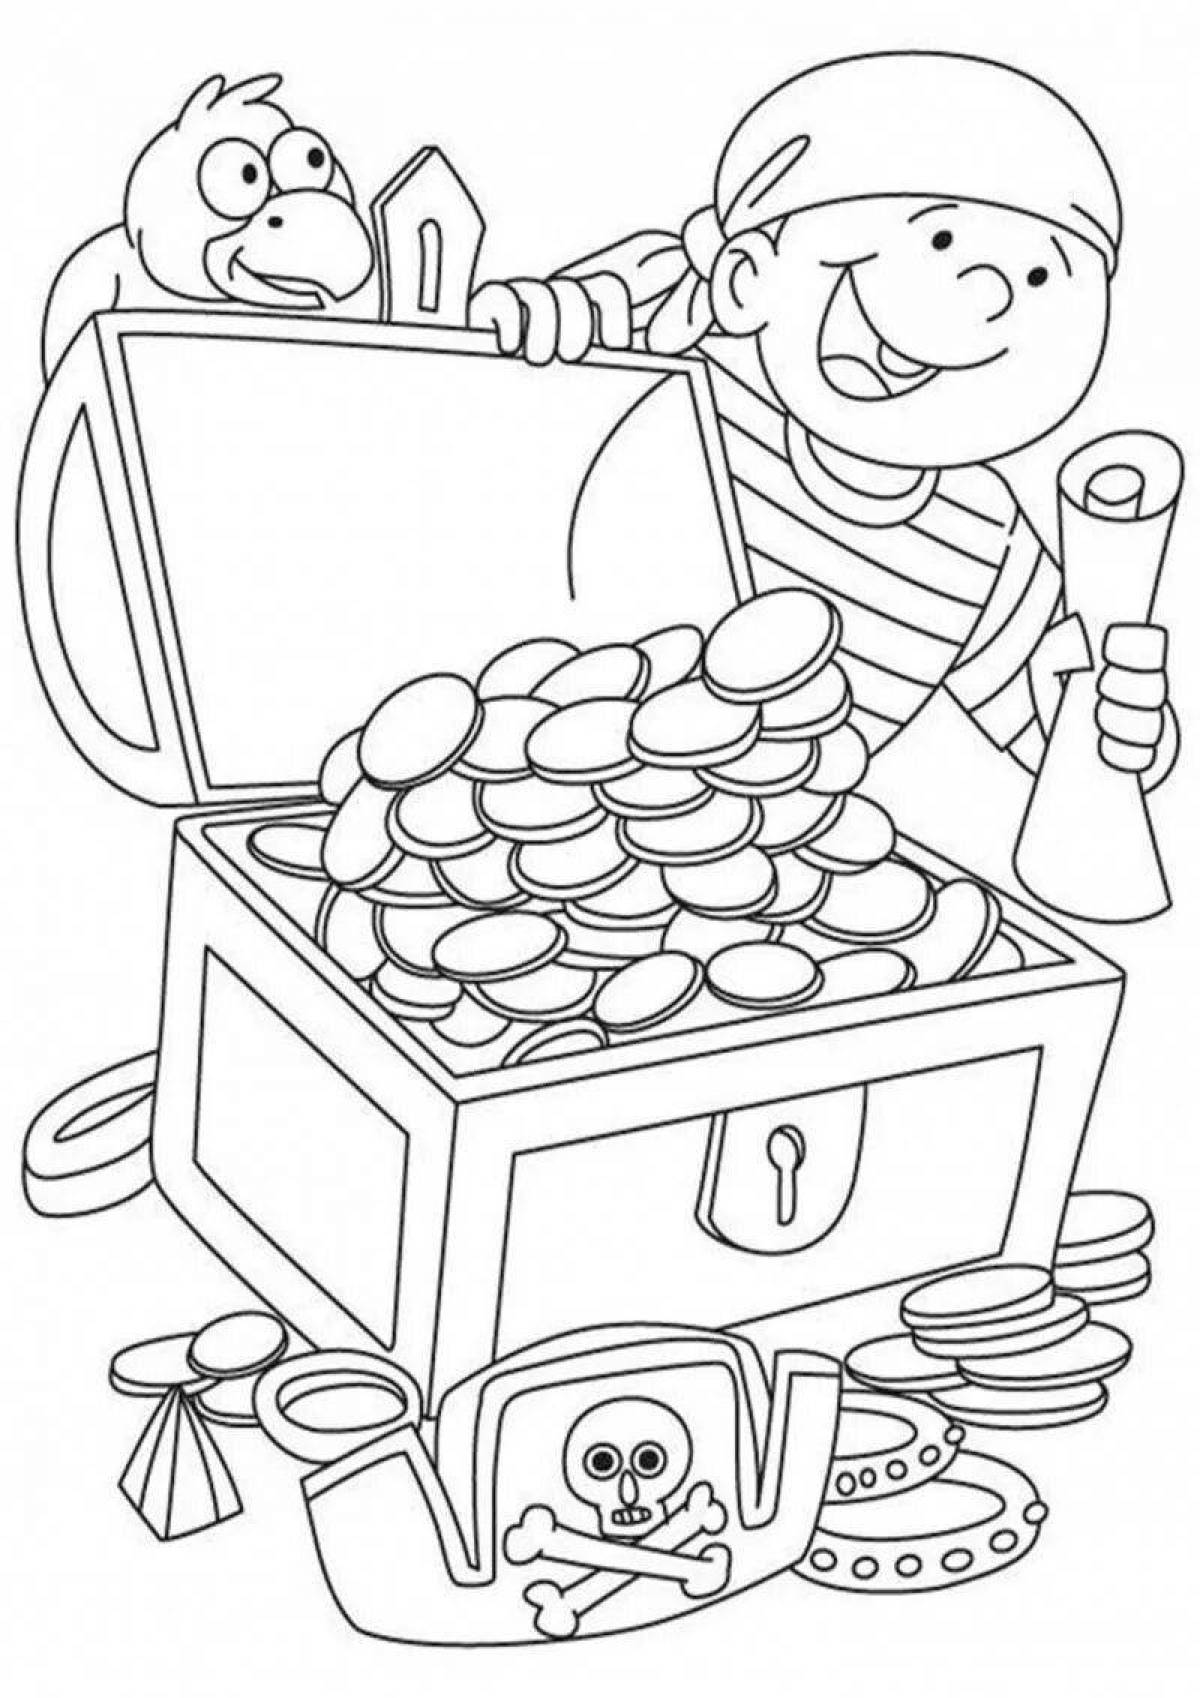 Colorful financial literacy coloring page for elementary school children